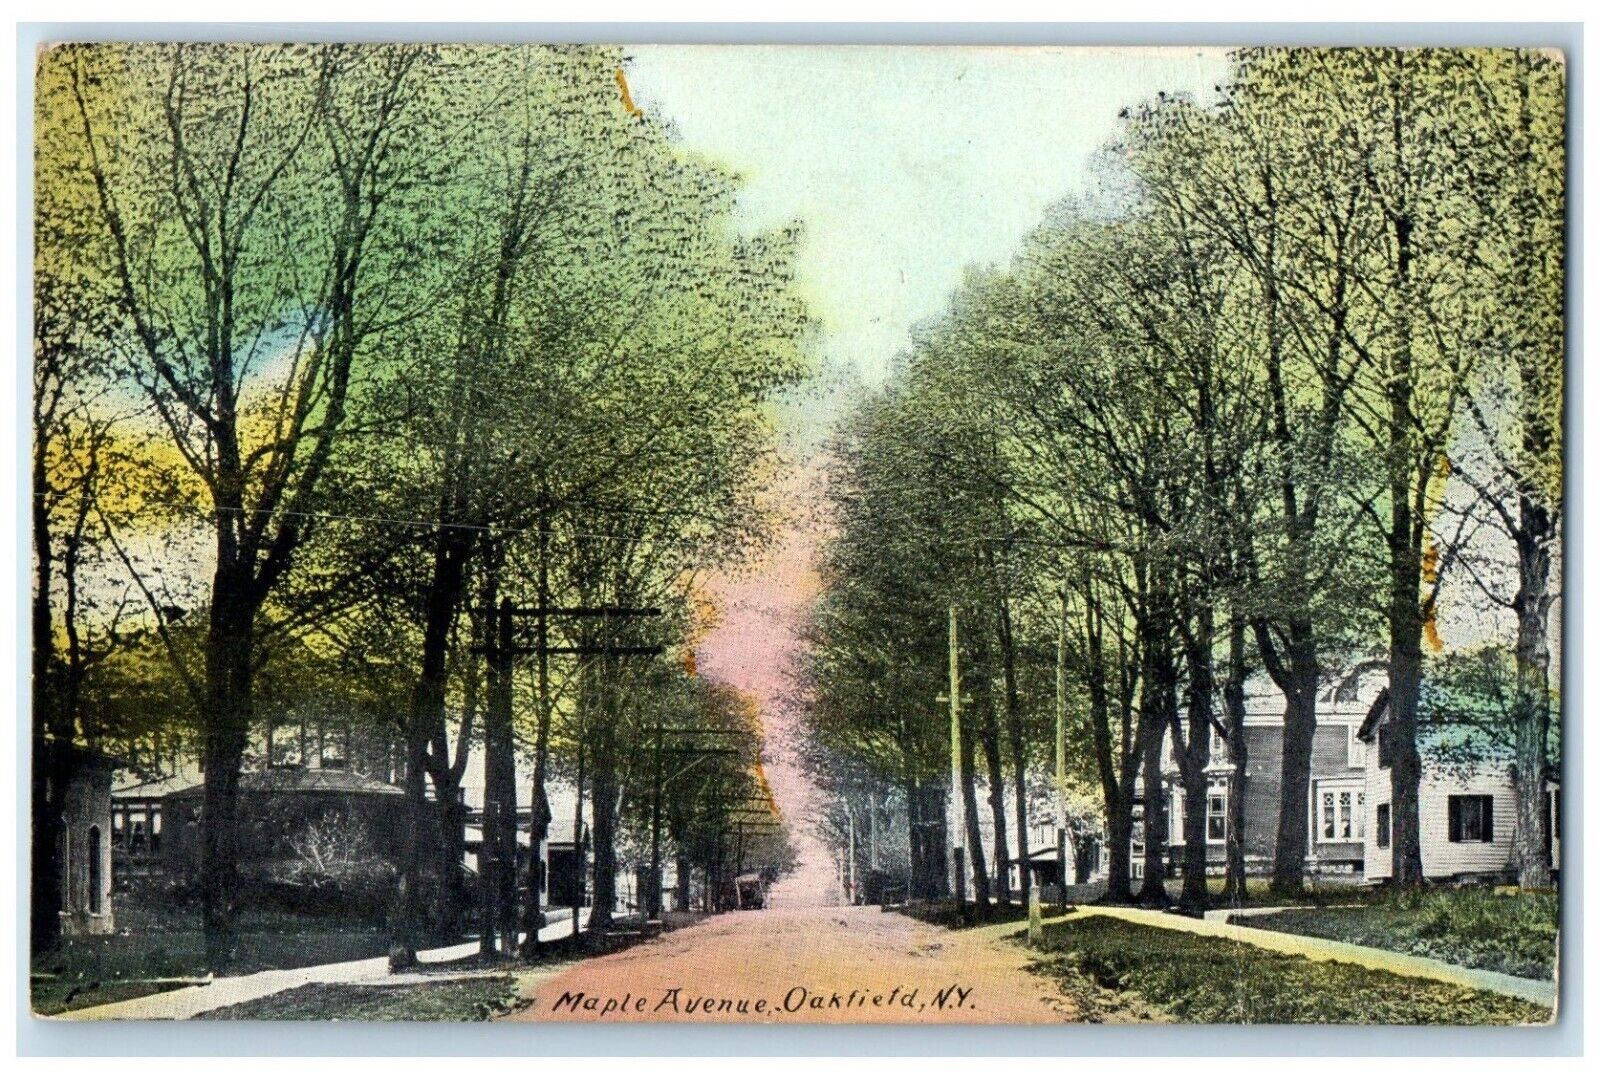 1909 Maple Avenue Exterior Houses Oakfield New York NY Vintage Antique Postcard